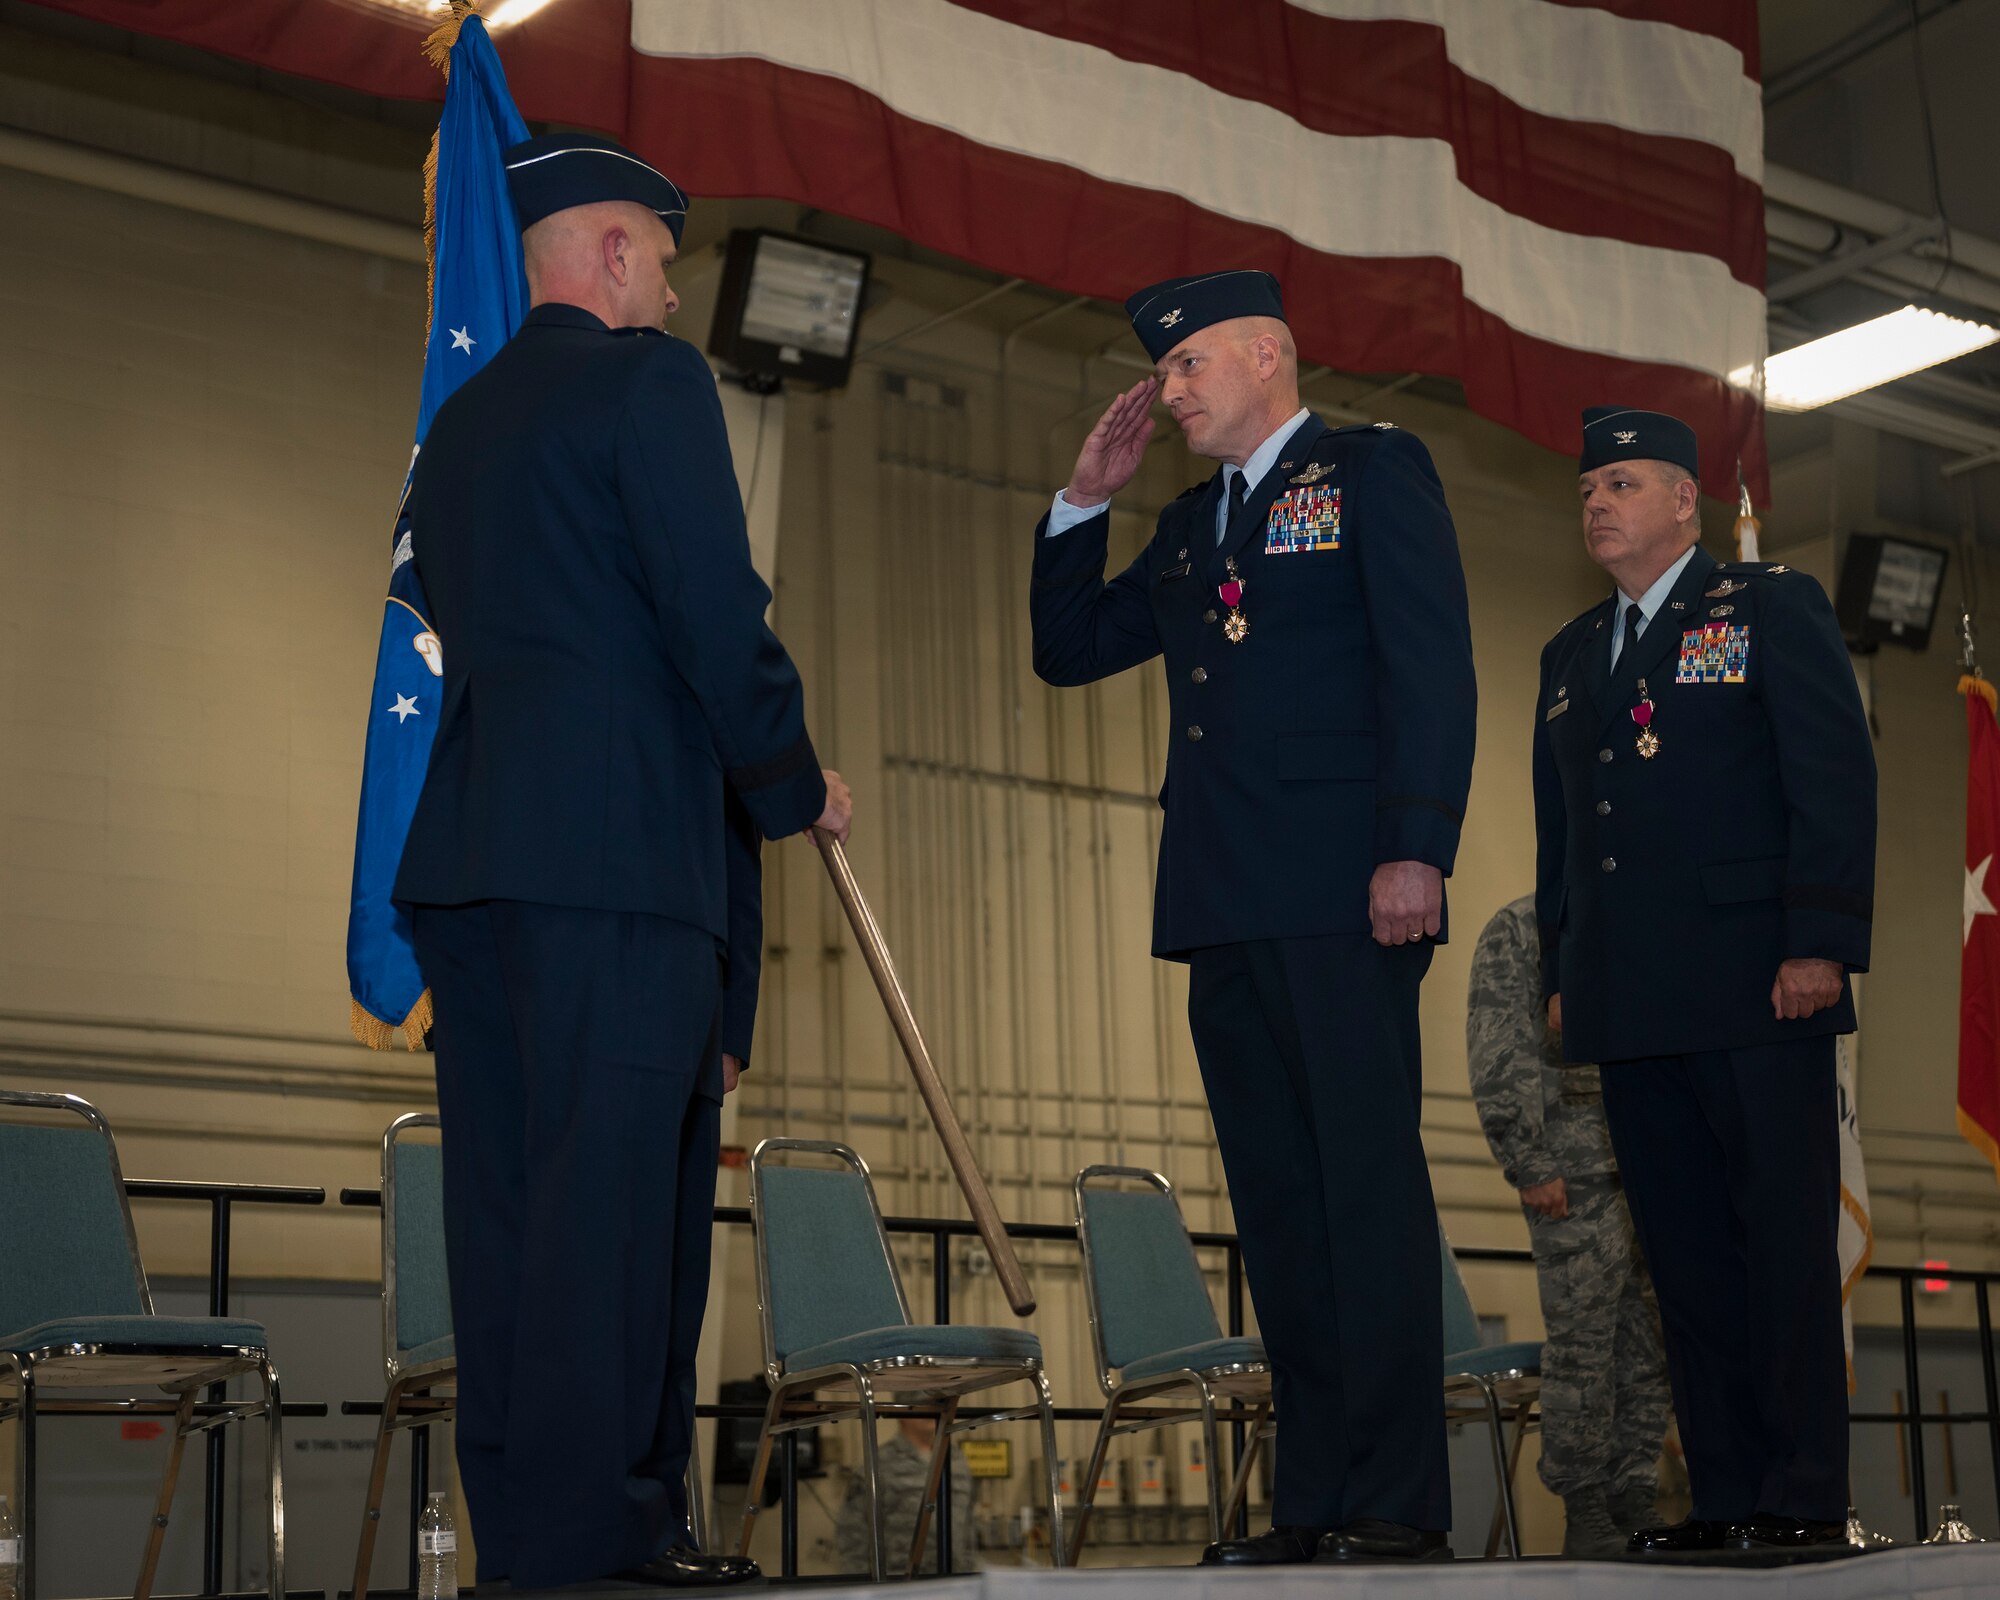 U.S. Air Force Col. Daniel McDonough, center, receives command of the 182nd Airlift Wing, Illinois Air national Guard, from Maj. Gen. Ron Paul, the assistant adjutant general – Air of the Illinois National Guard, during a change of command in Peoria, Ill., Nov. 4, 2017. McDonough replaced Col. William Robertson, right, who became the chief of staff for the Illinois Air National Guard upon his promotion to brigadier general during the ceremony. (U.S. Air National Guard photo by Tech. Sgt. Lealan Buehrer)